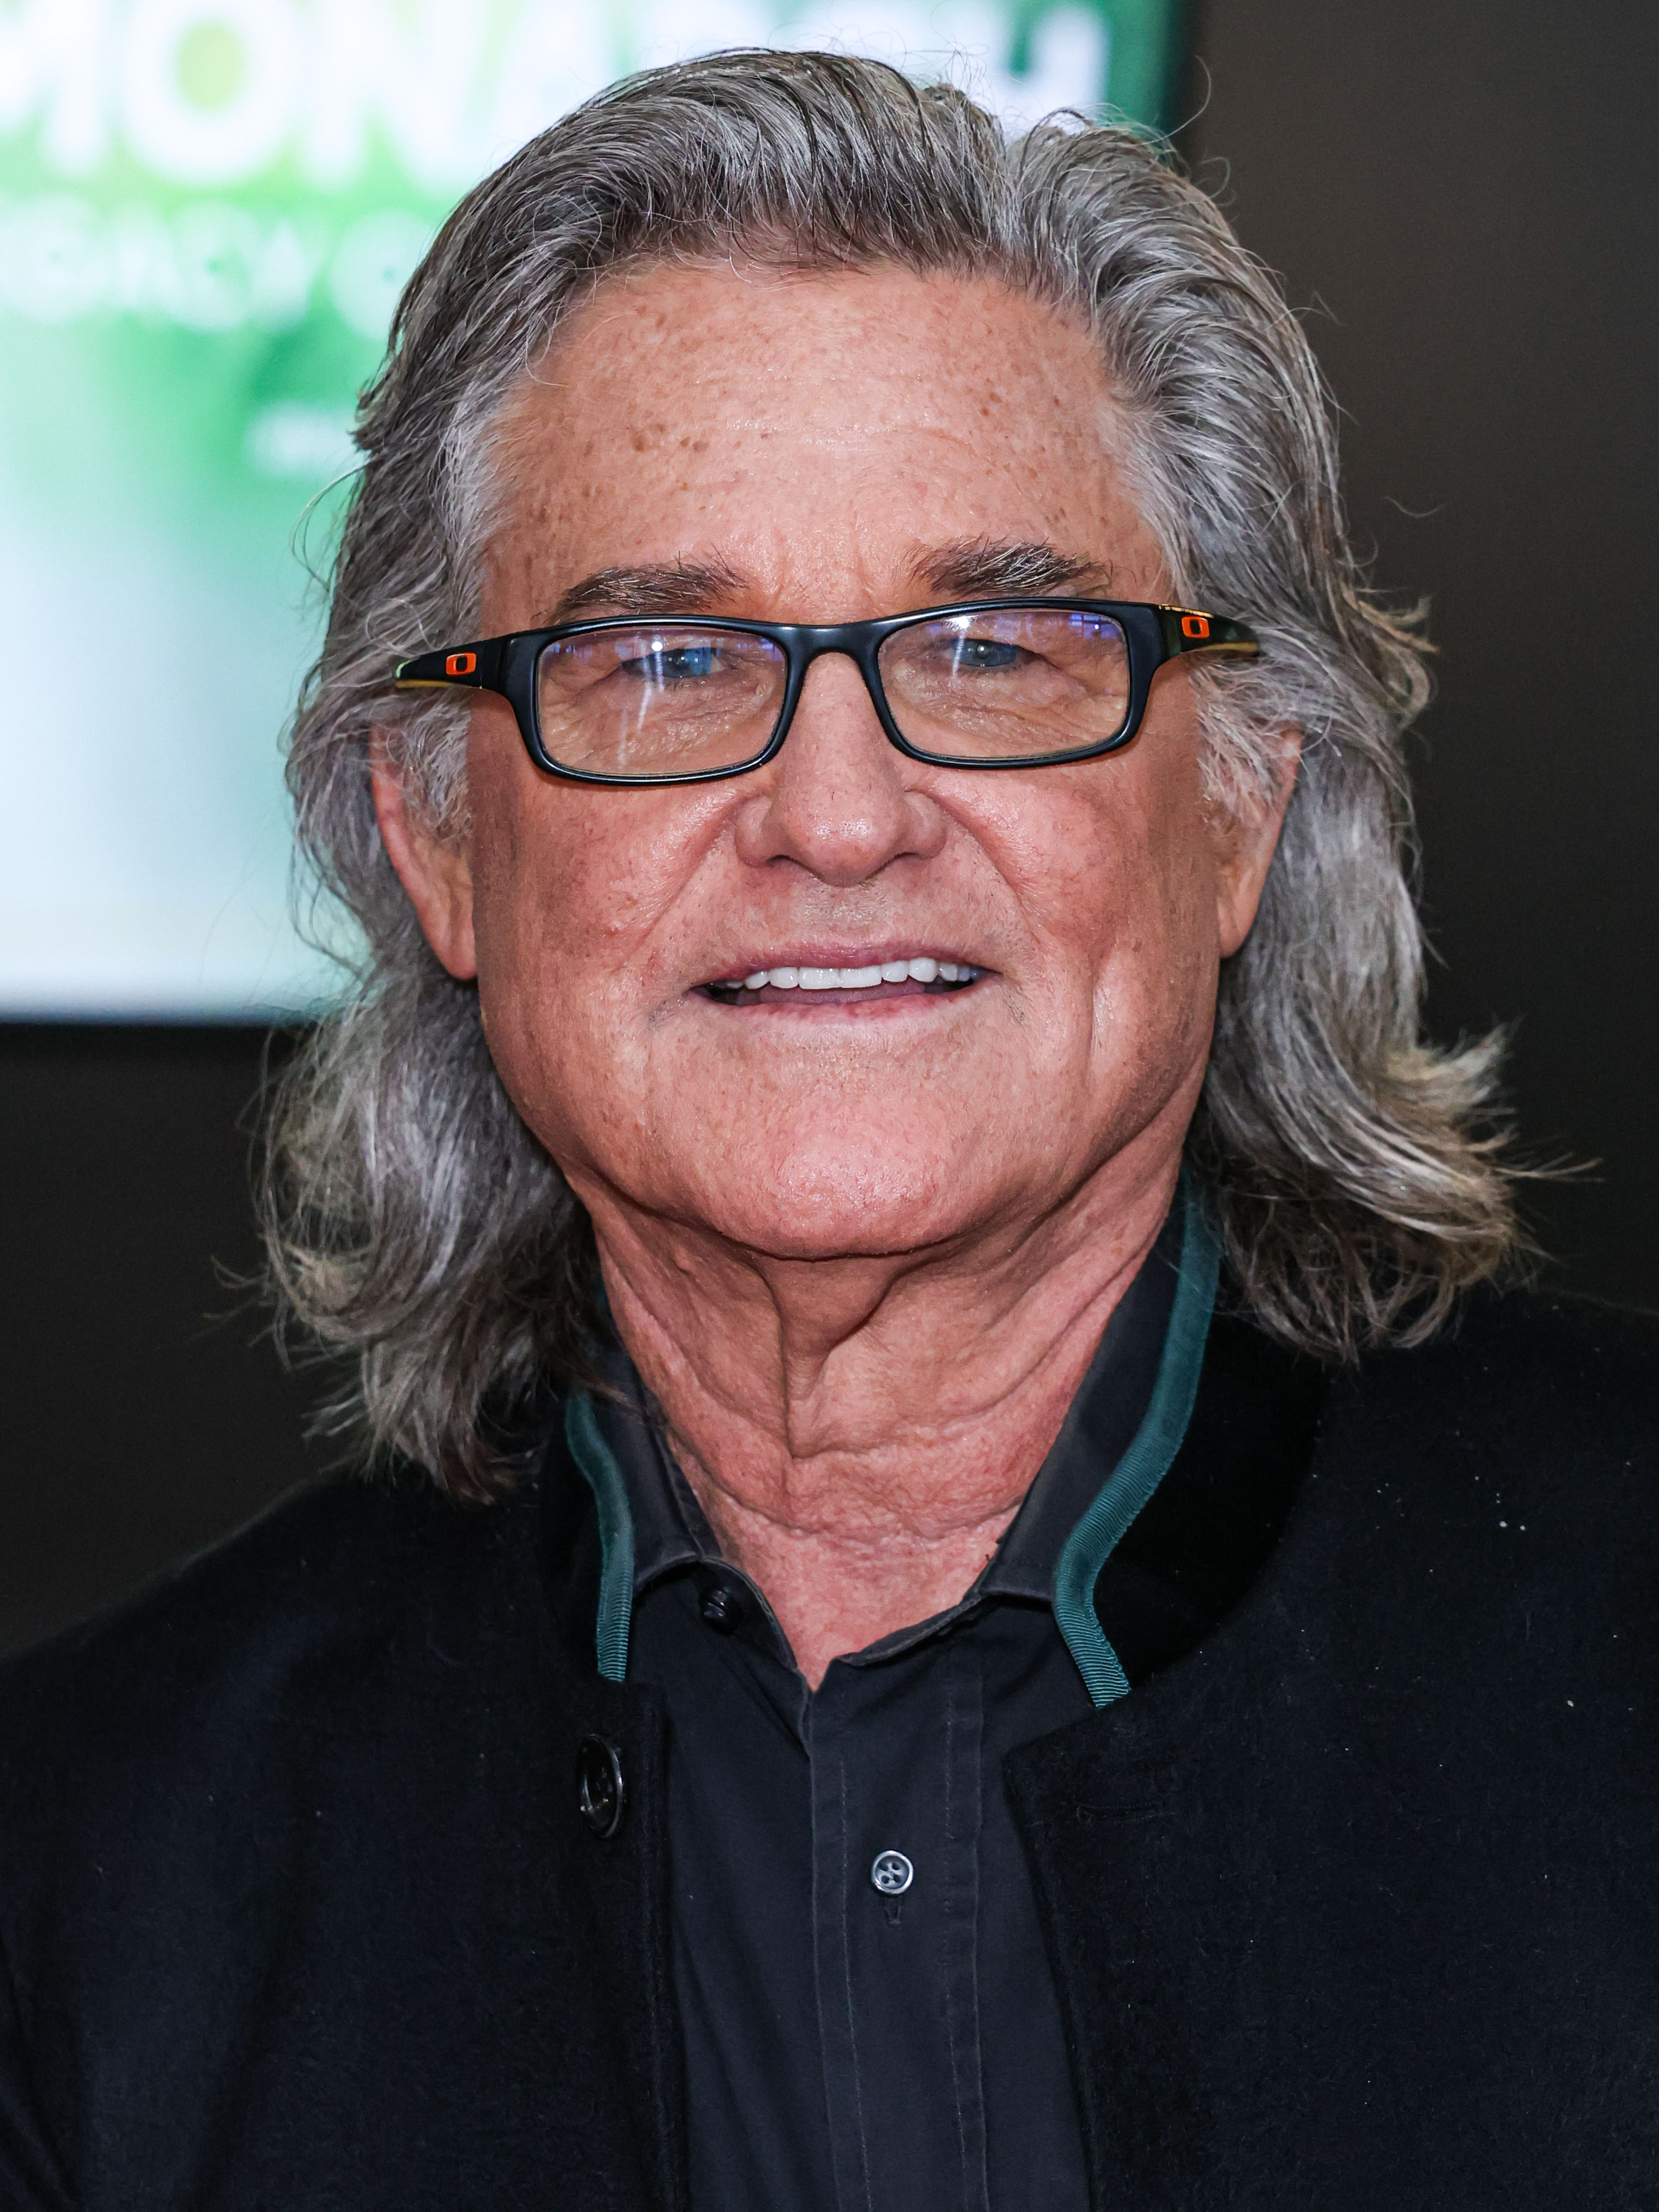 Kurt Russell and Goldie Hawn have starred in many films over the decades including Overboard and The Christmas Chronicles